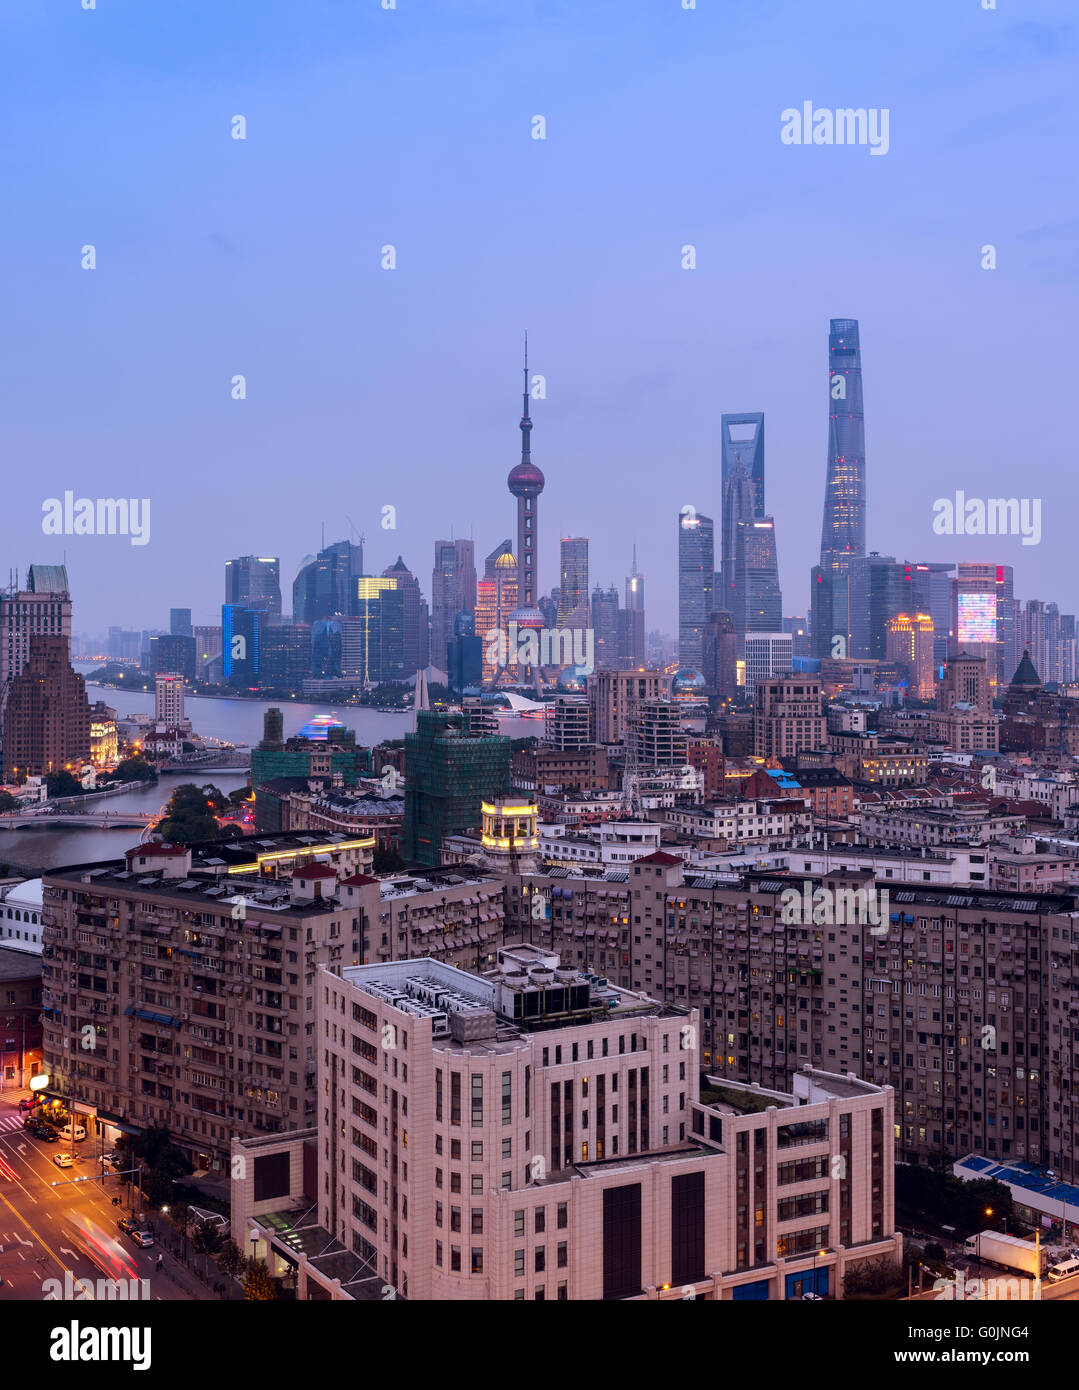 Elevated  view of Shanghai skyline at night. Stock Photo